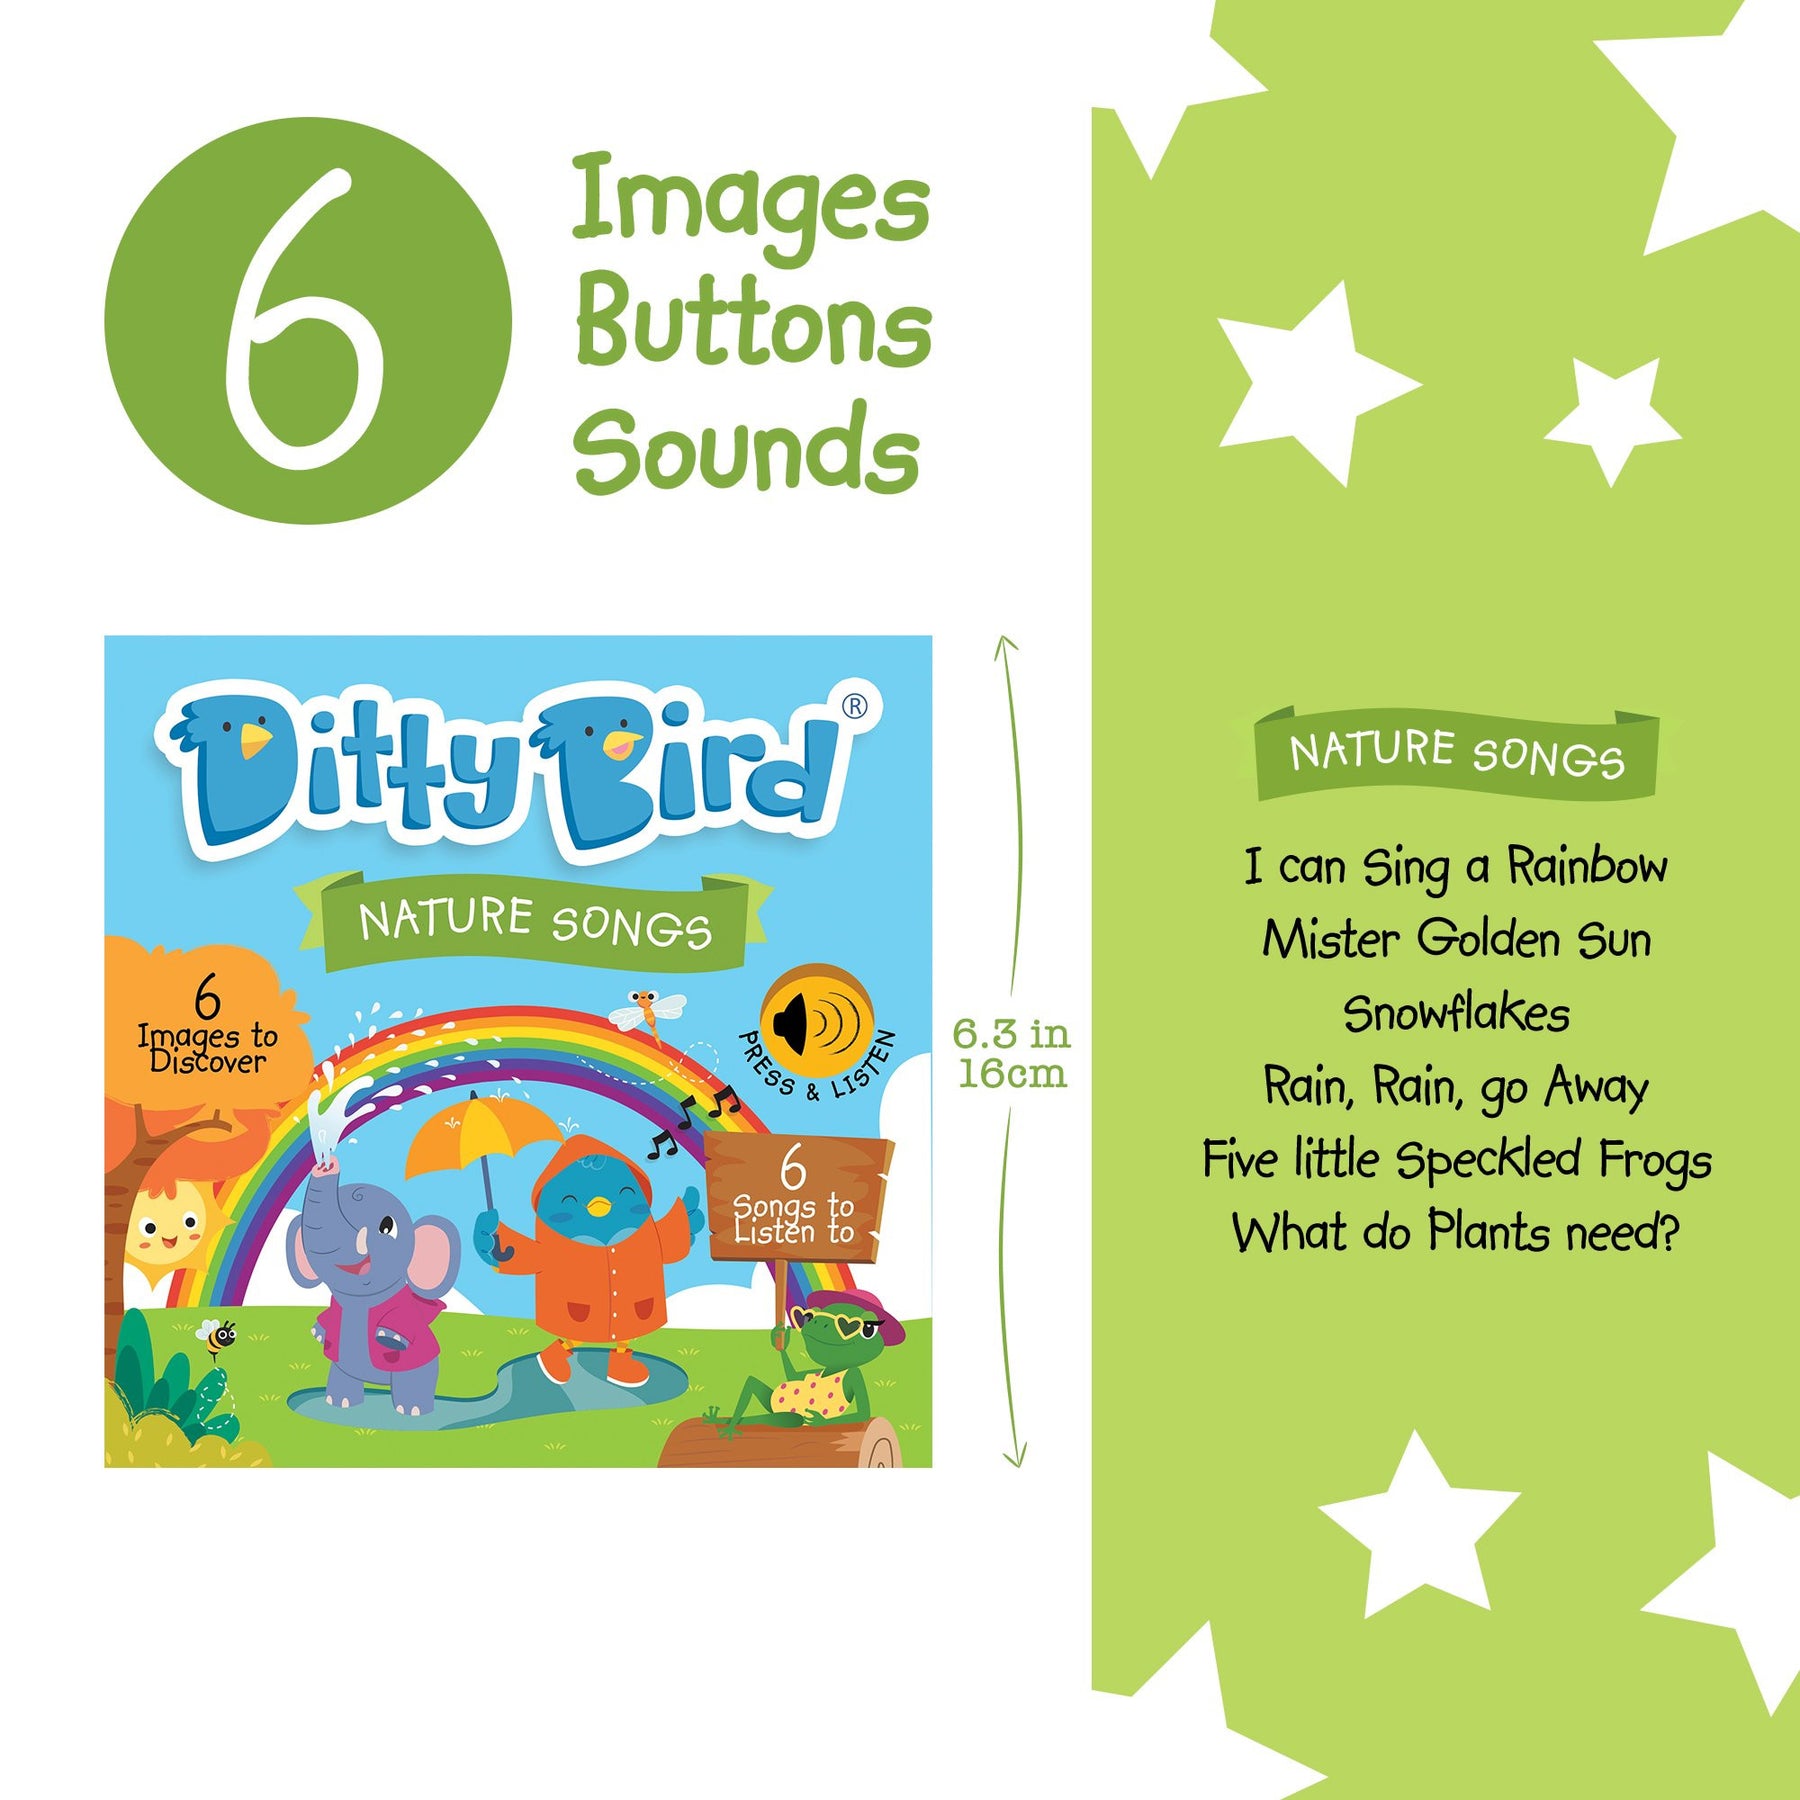 Ditty Bird Nature Songs Sounds Book [Authentic] - Audio Sound Book for Children Ages 1+ Ready Stocks [B1-2]